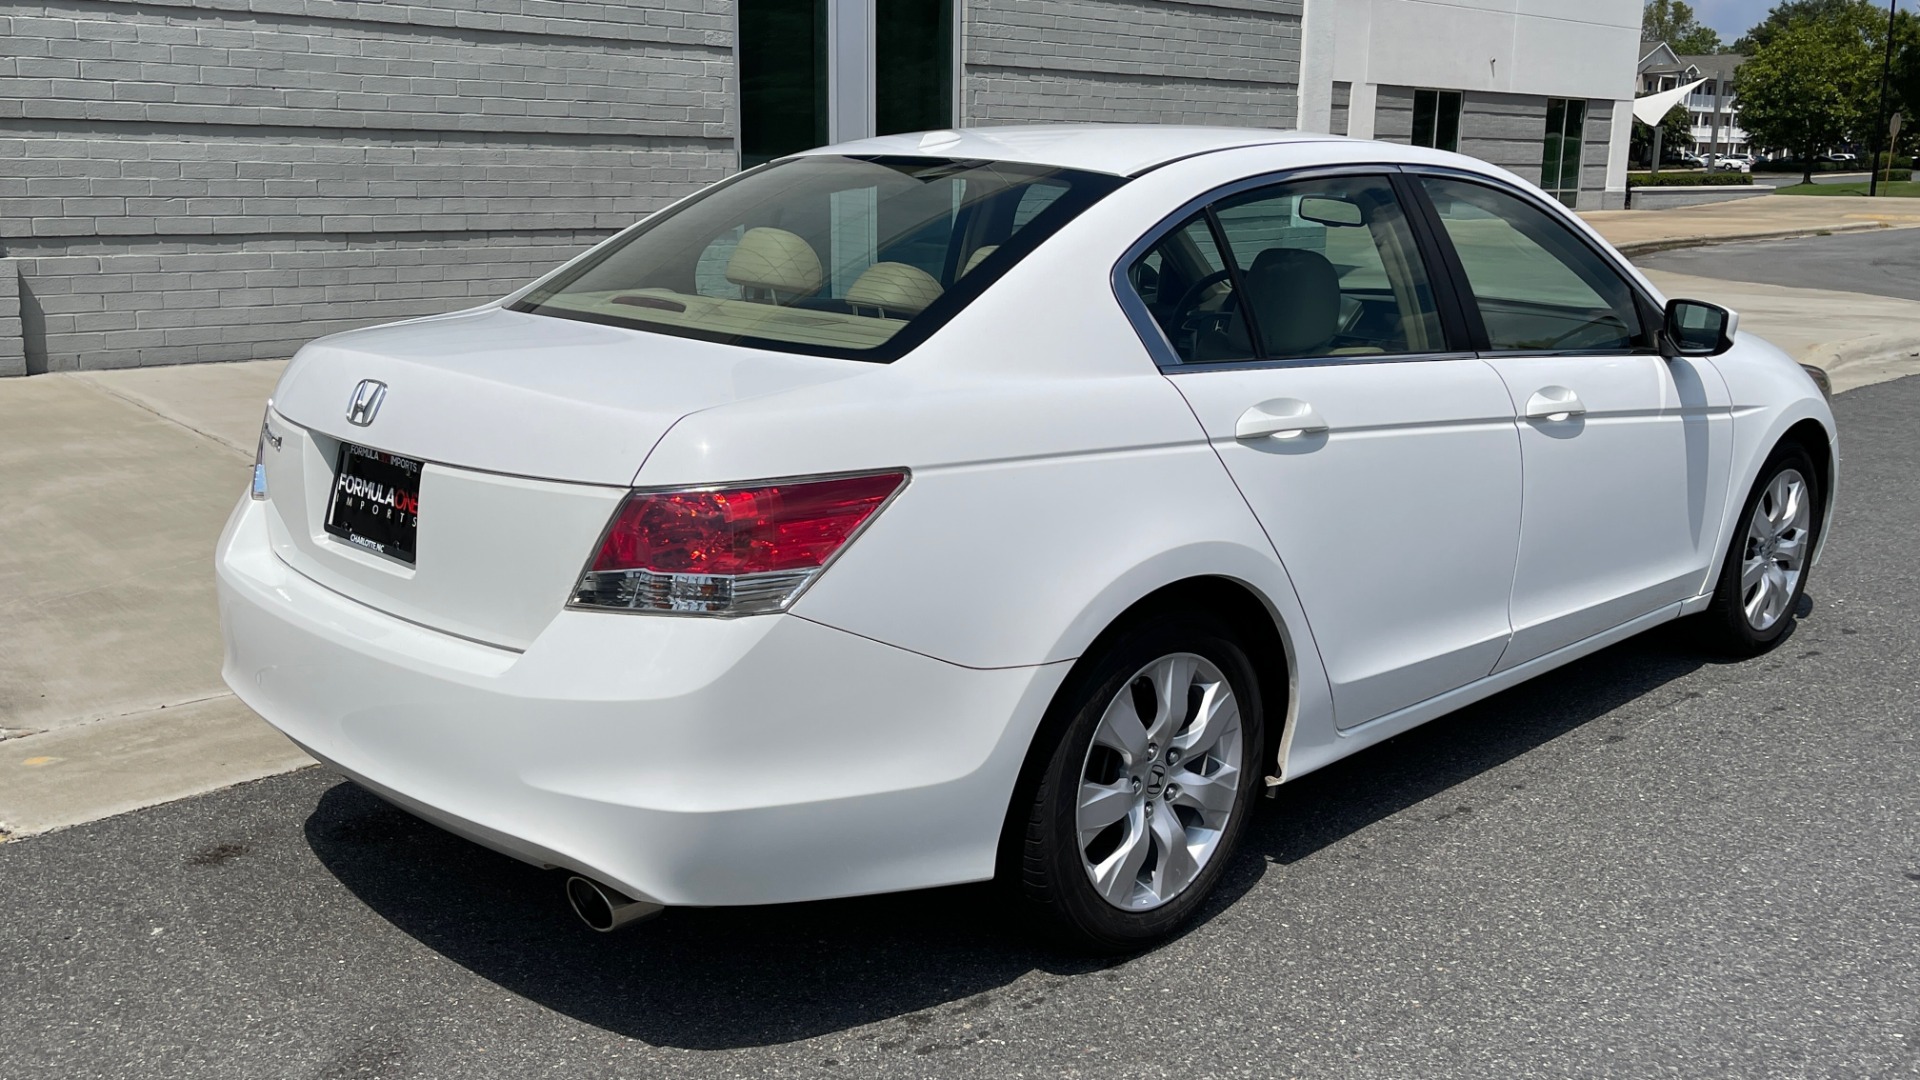 Used 2009 Honda ACCORD EX-L 4DR / 2.4L / AUTO / SUNROOF / ANC / DUAL-ZONE AUTO A/C for sale Sold at Formula Imports in Charlotte NC 28227 9